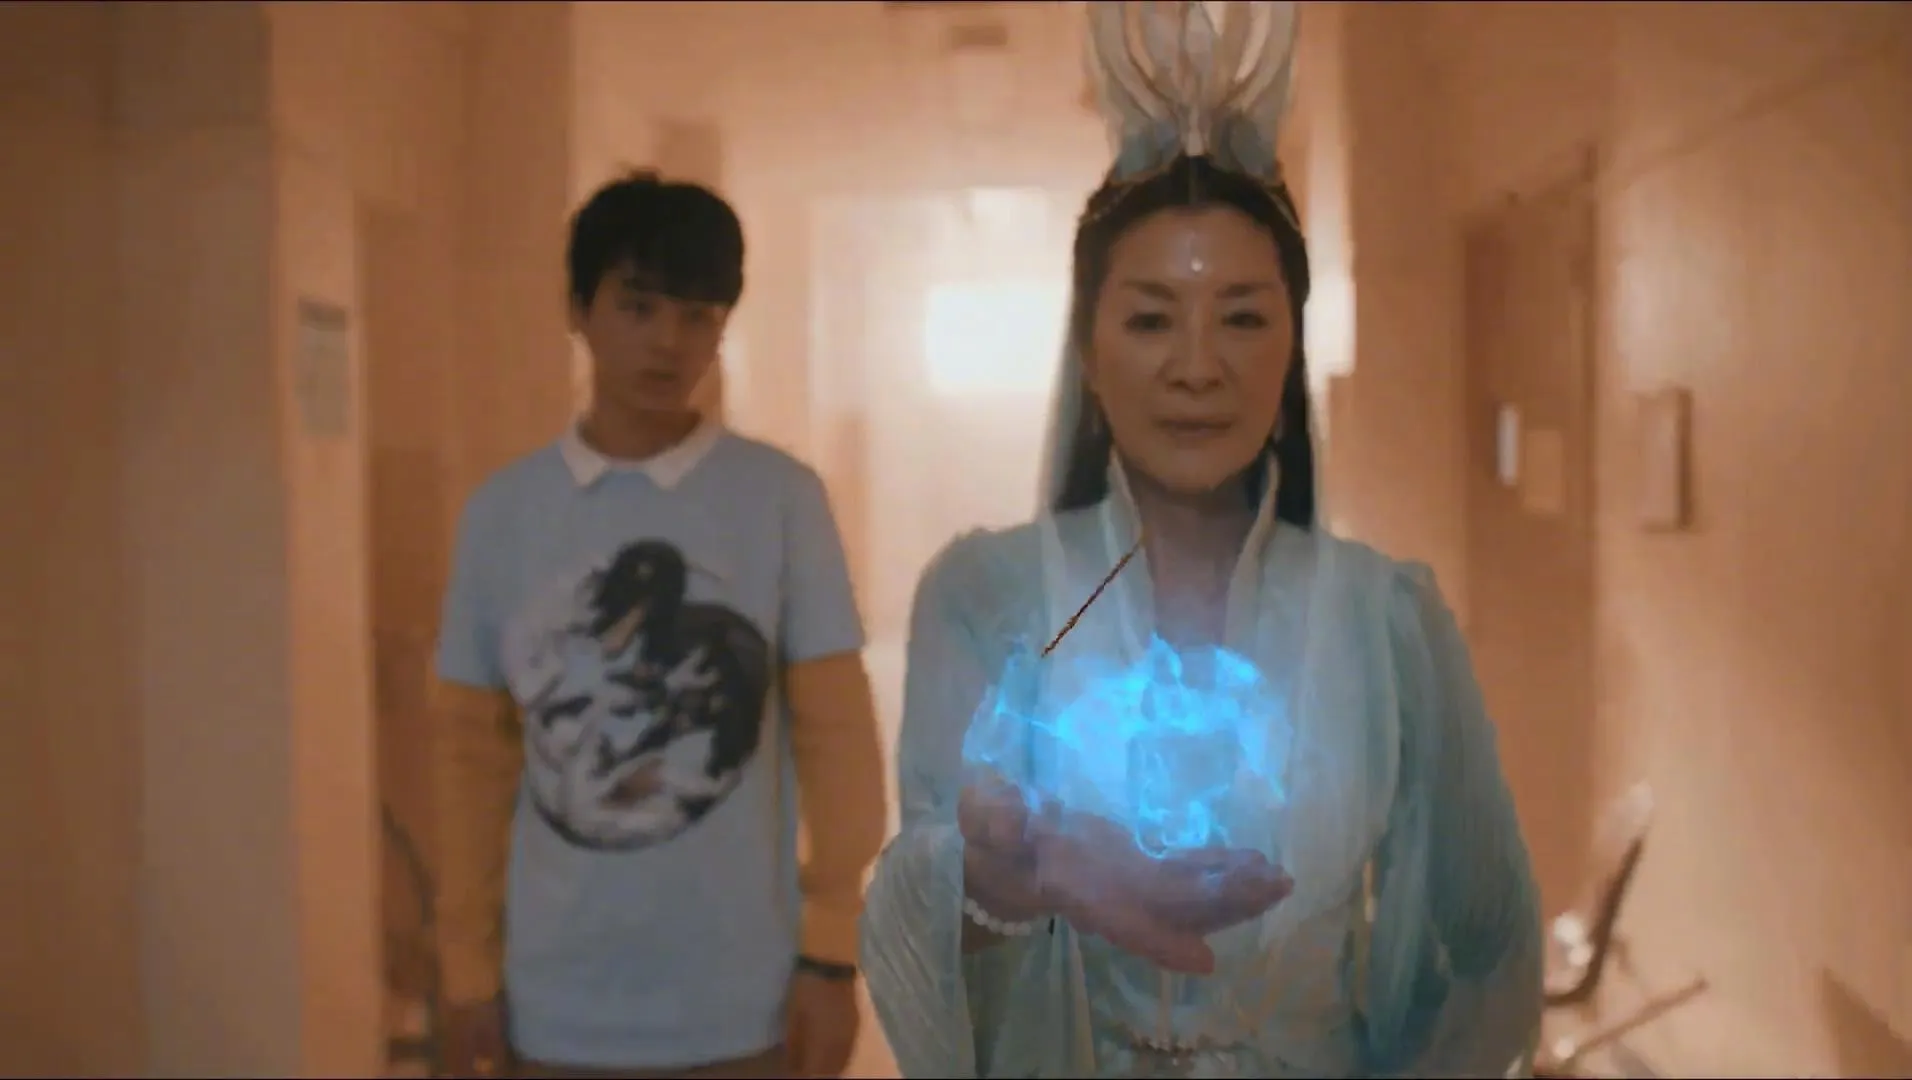 The look of Guanyin played by Michelle Yeoh in 'American Born Chinese' | FMV6